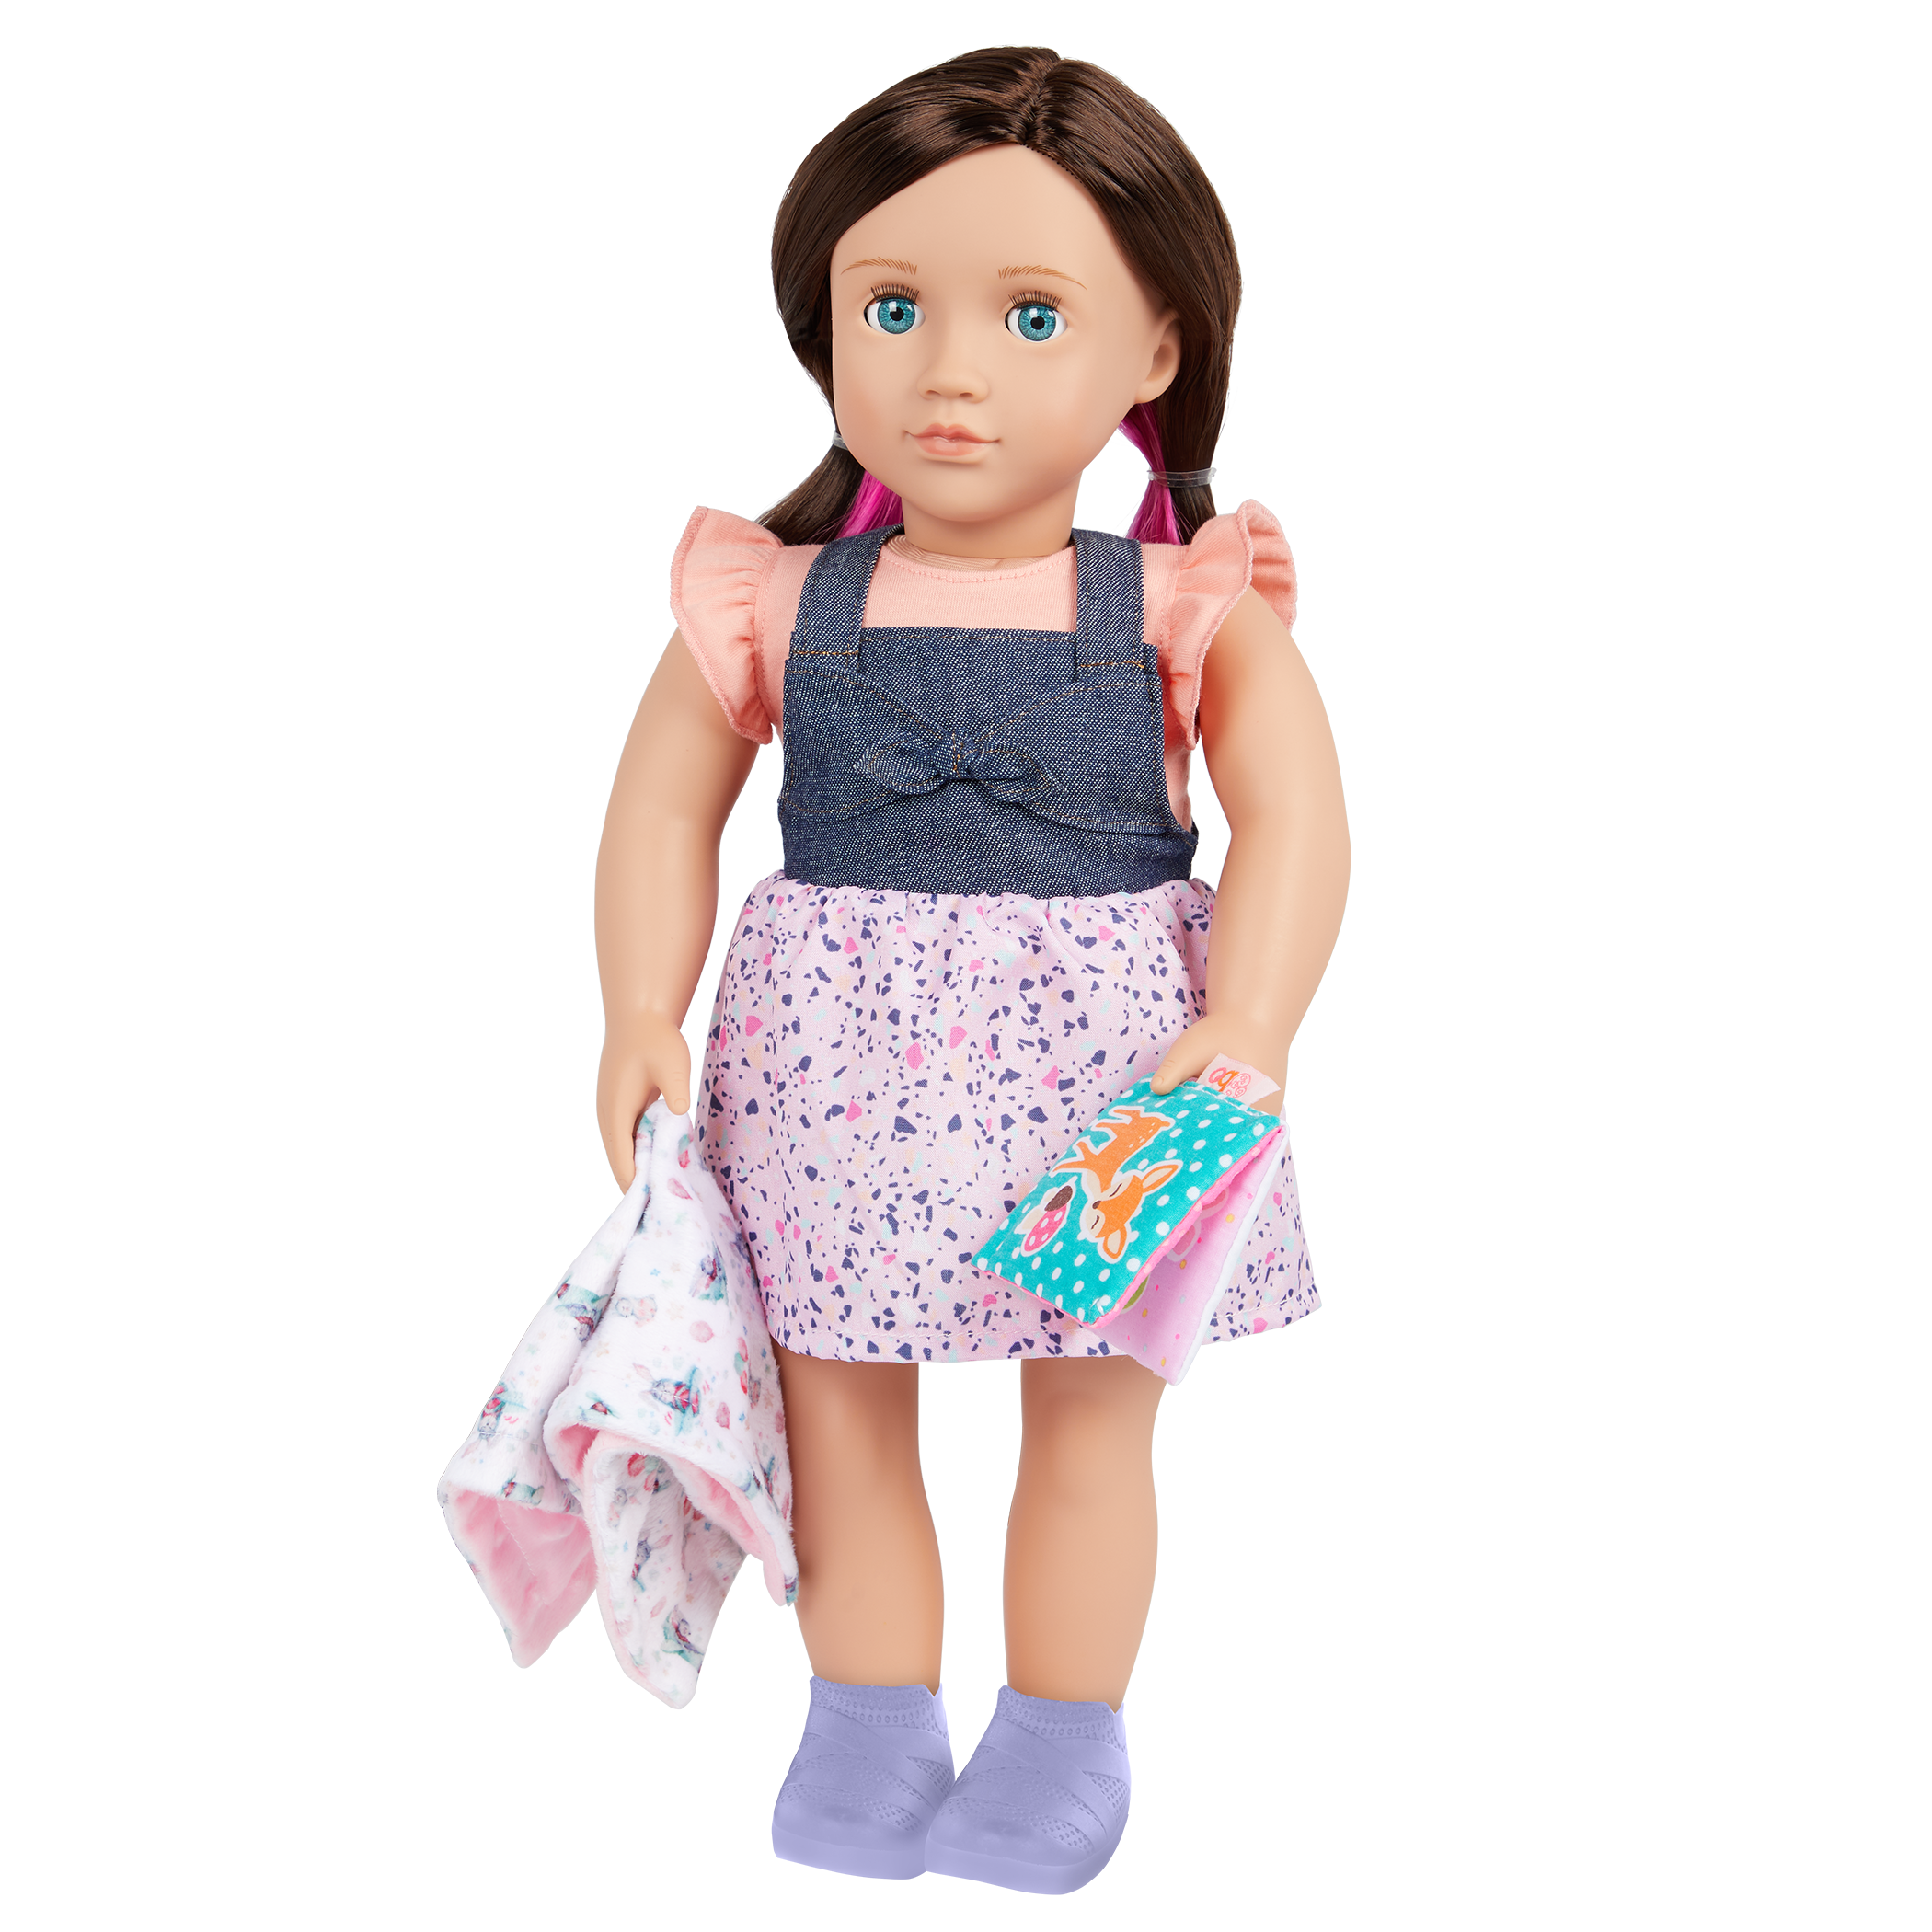 Our Generation 18-inch Babysitter Doll Katherine